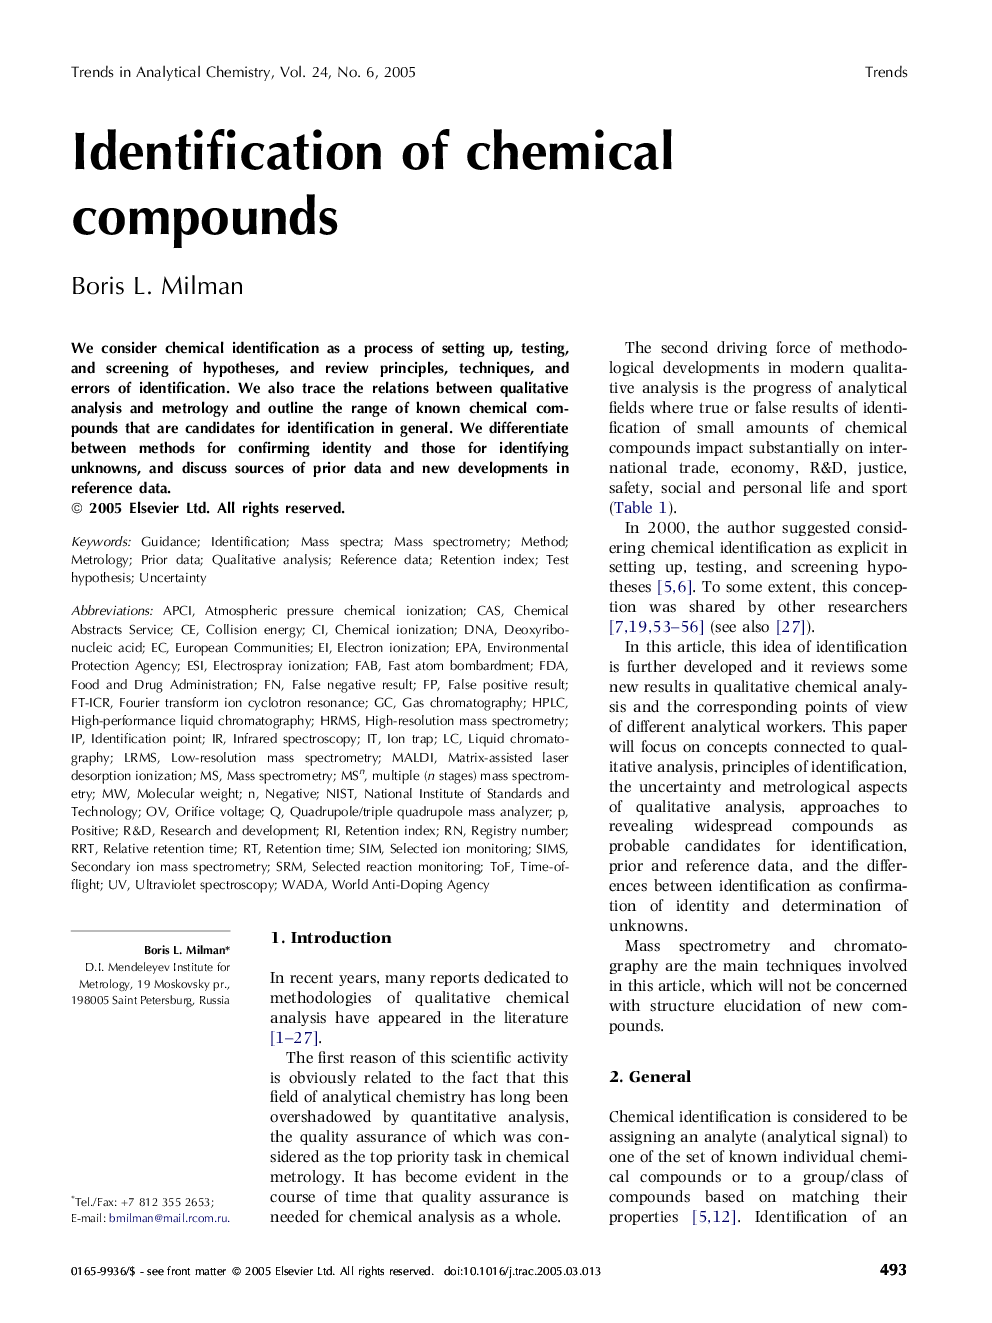 Identification of chemical compounds